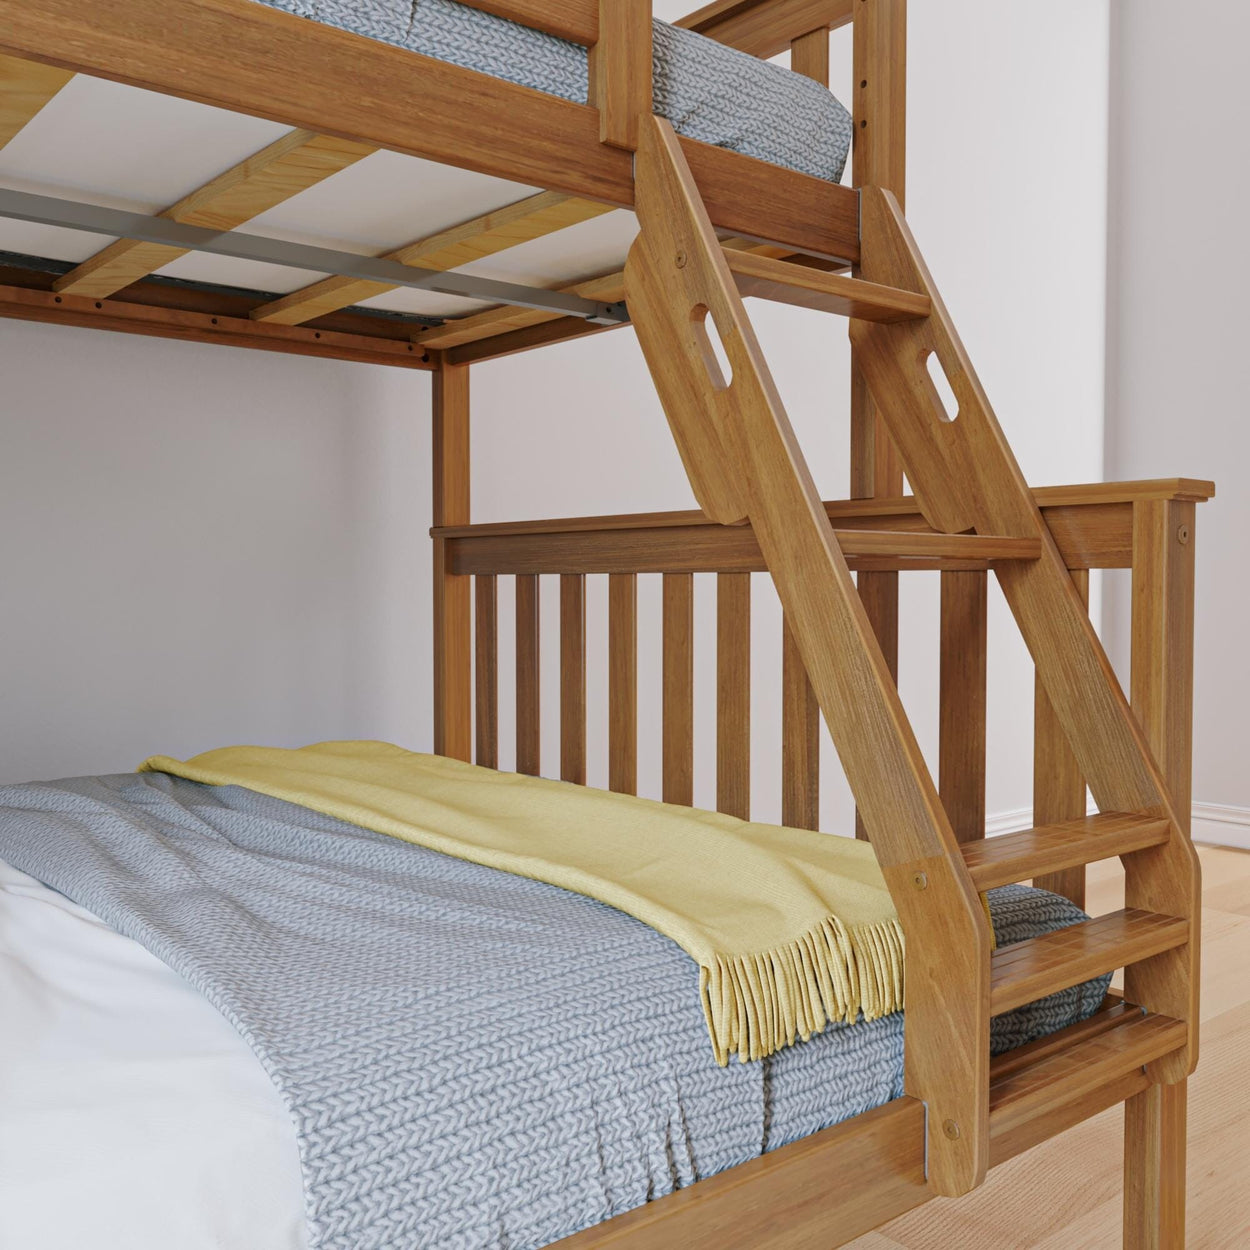 180231-007 : Bunk Beds Classic Twin over Full Bunk Bed, Pecan